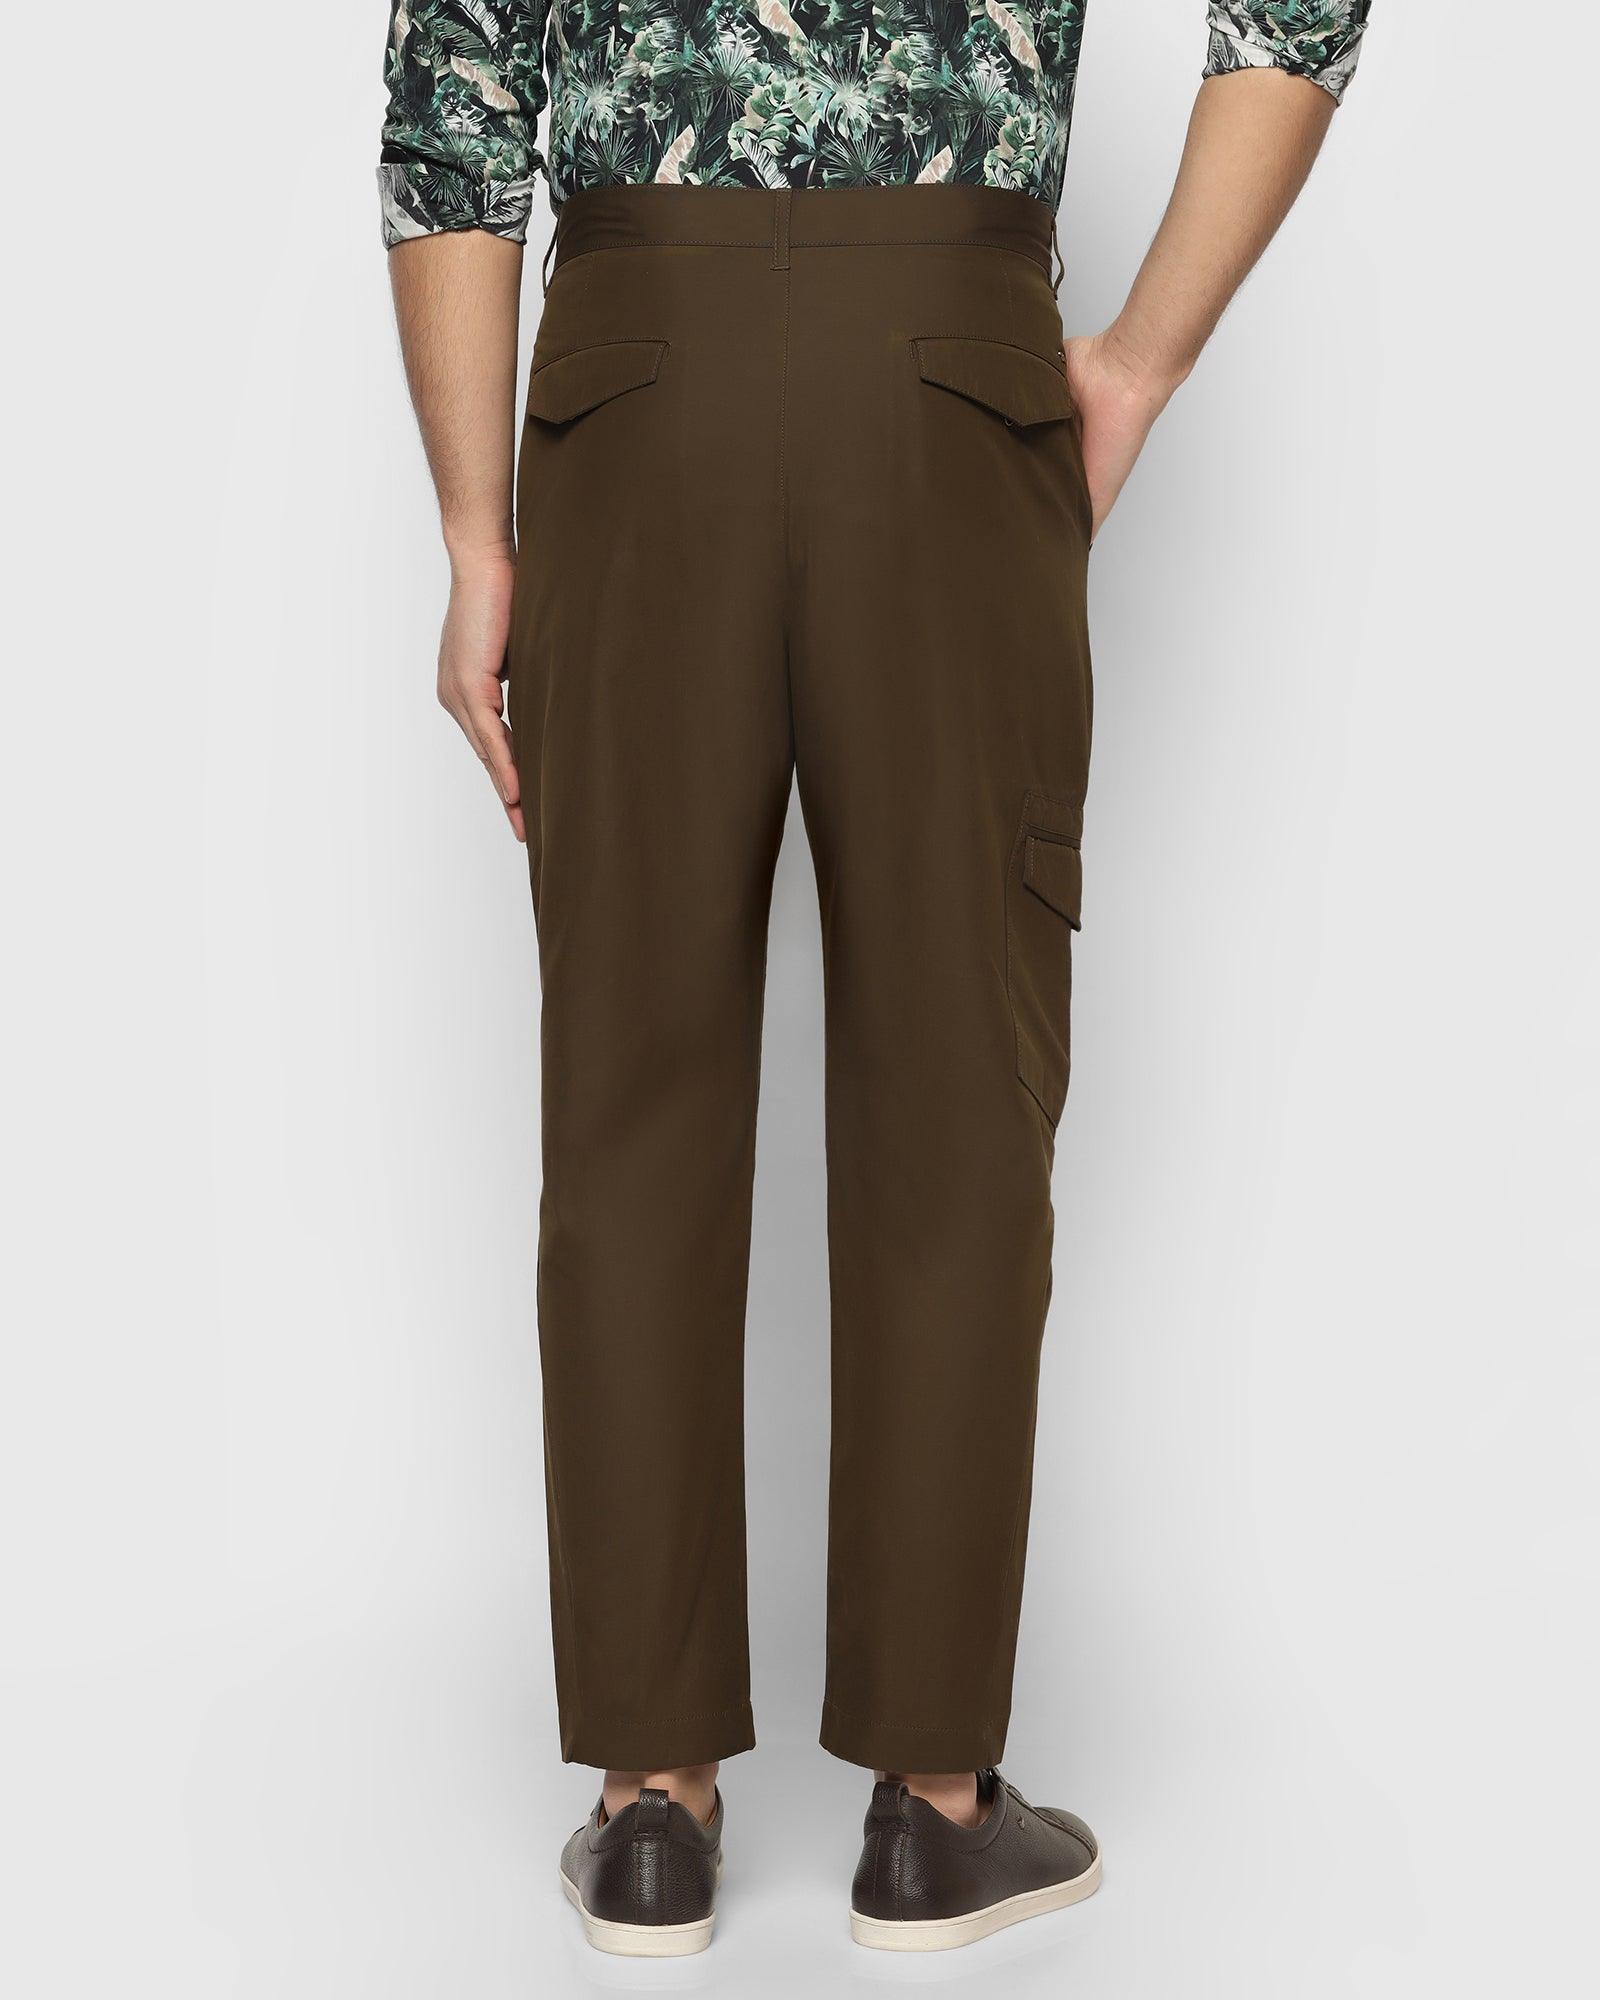 Nadal Casual Olive Solid Khakis - Cargo